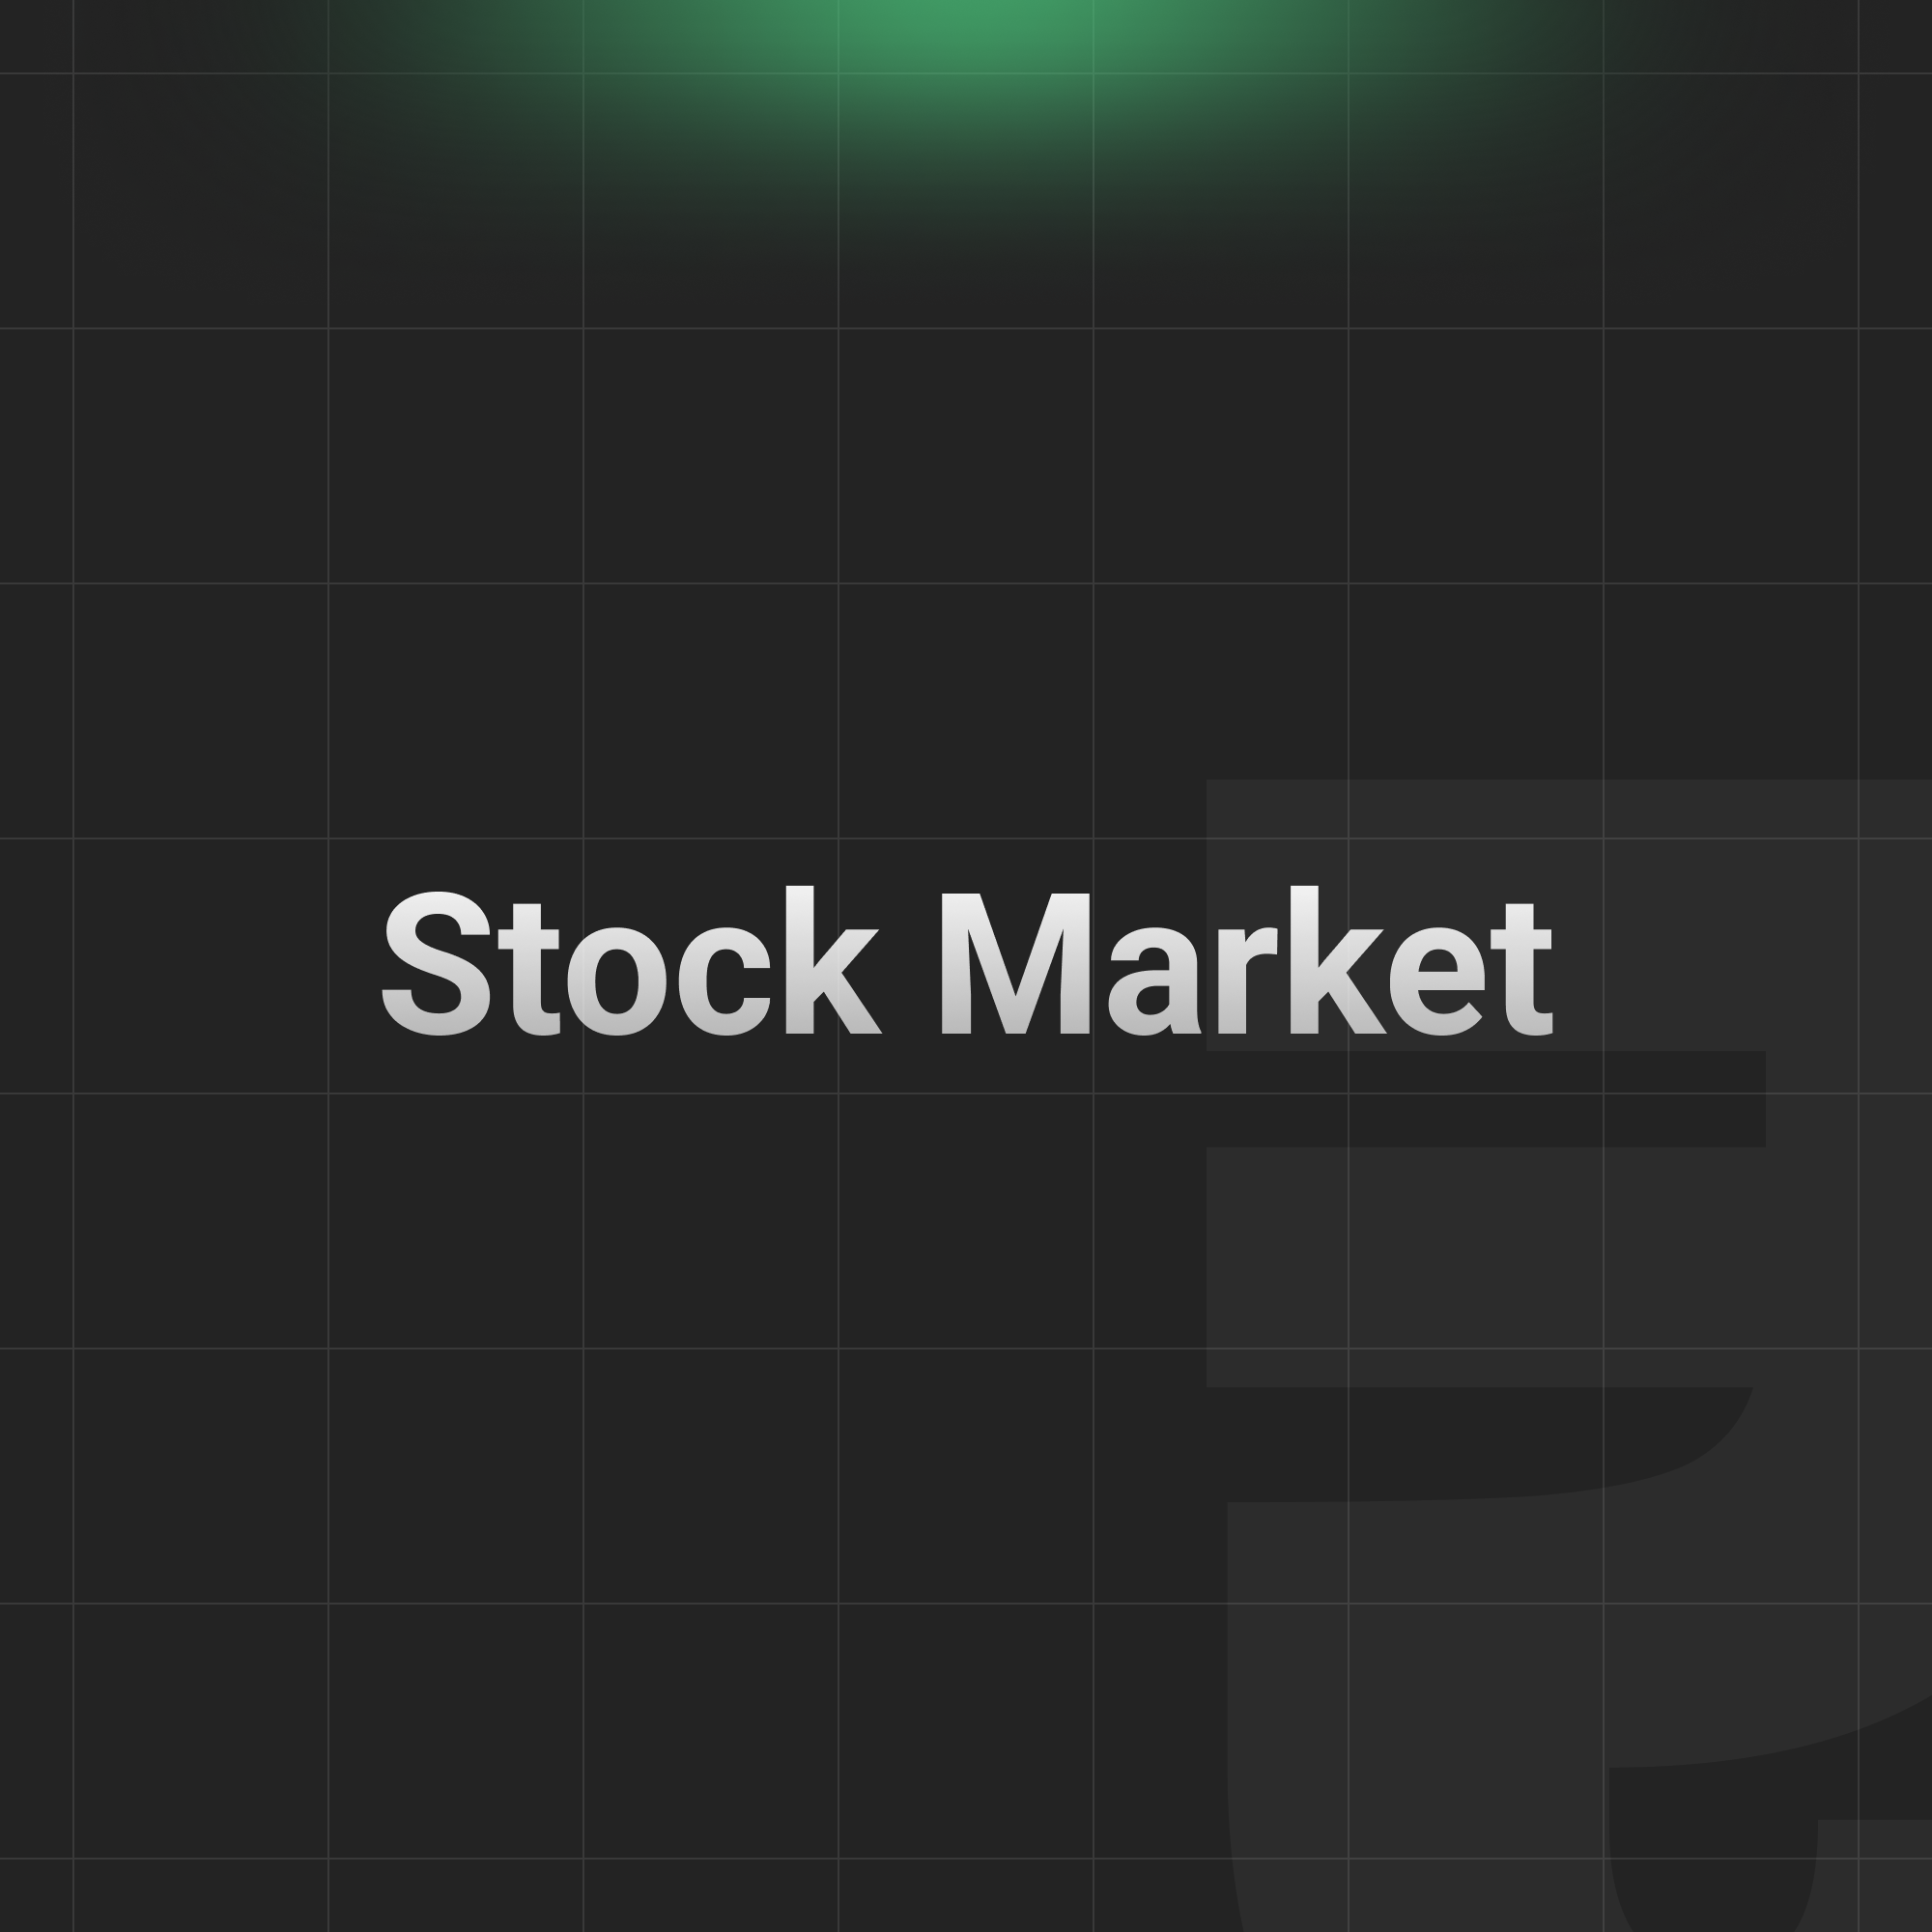 What is Stock market and how does it work?